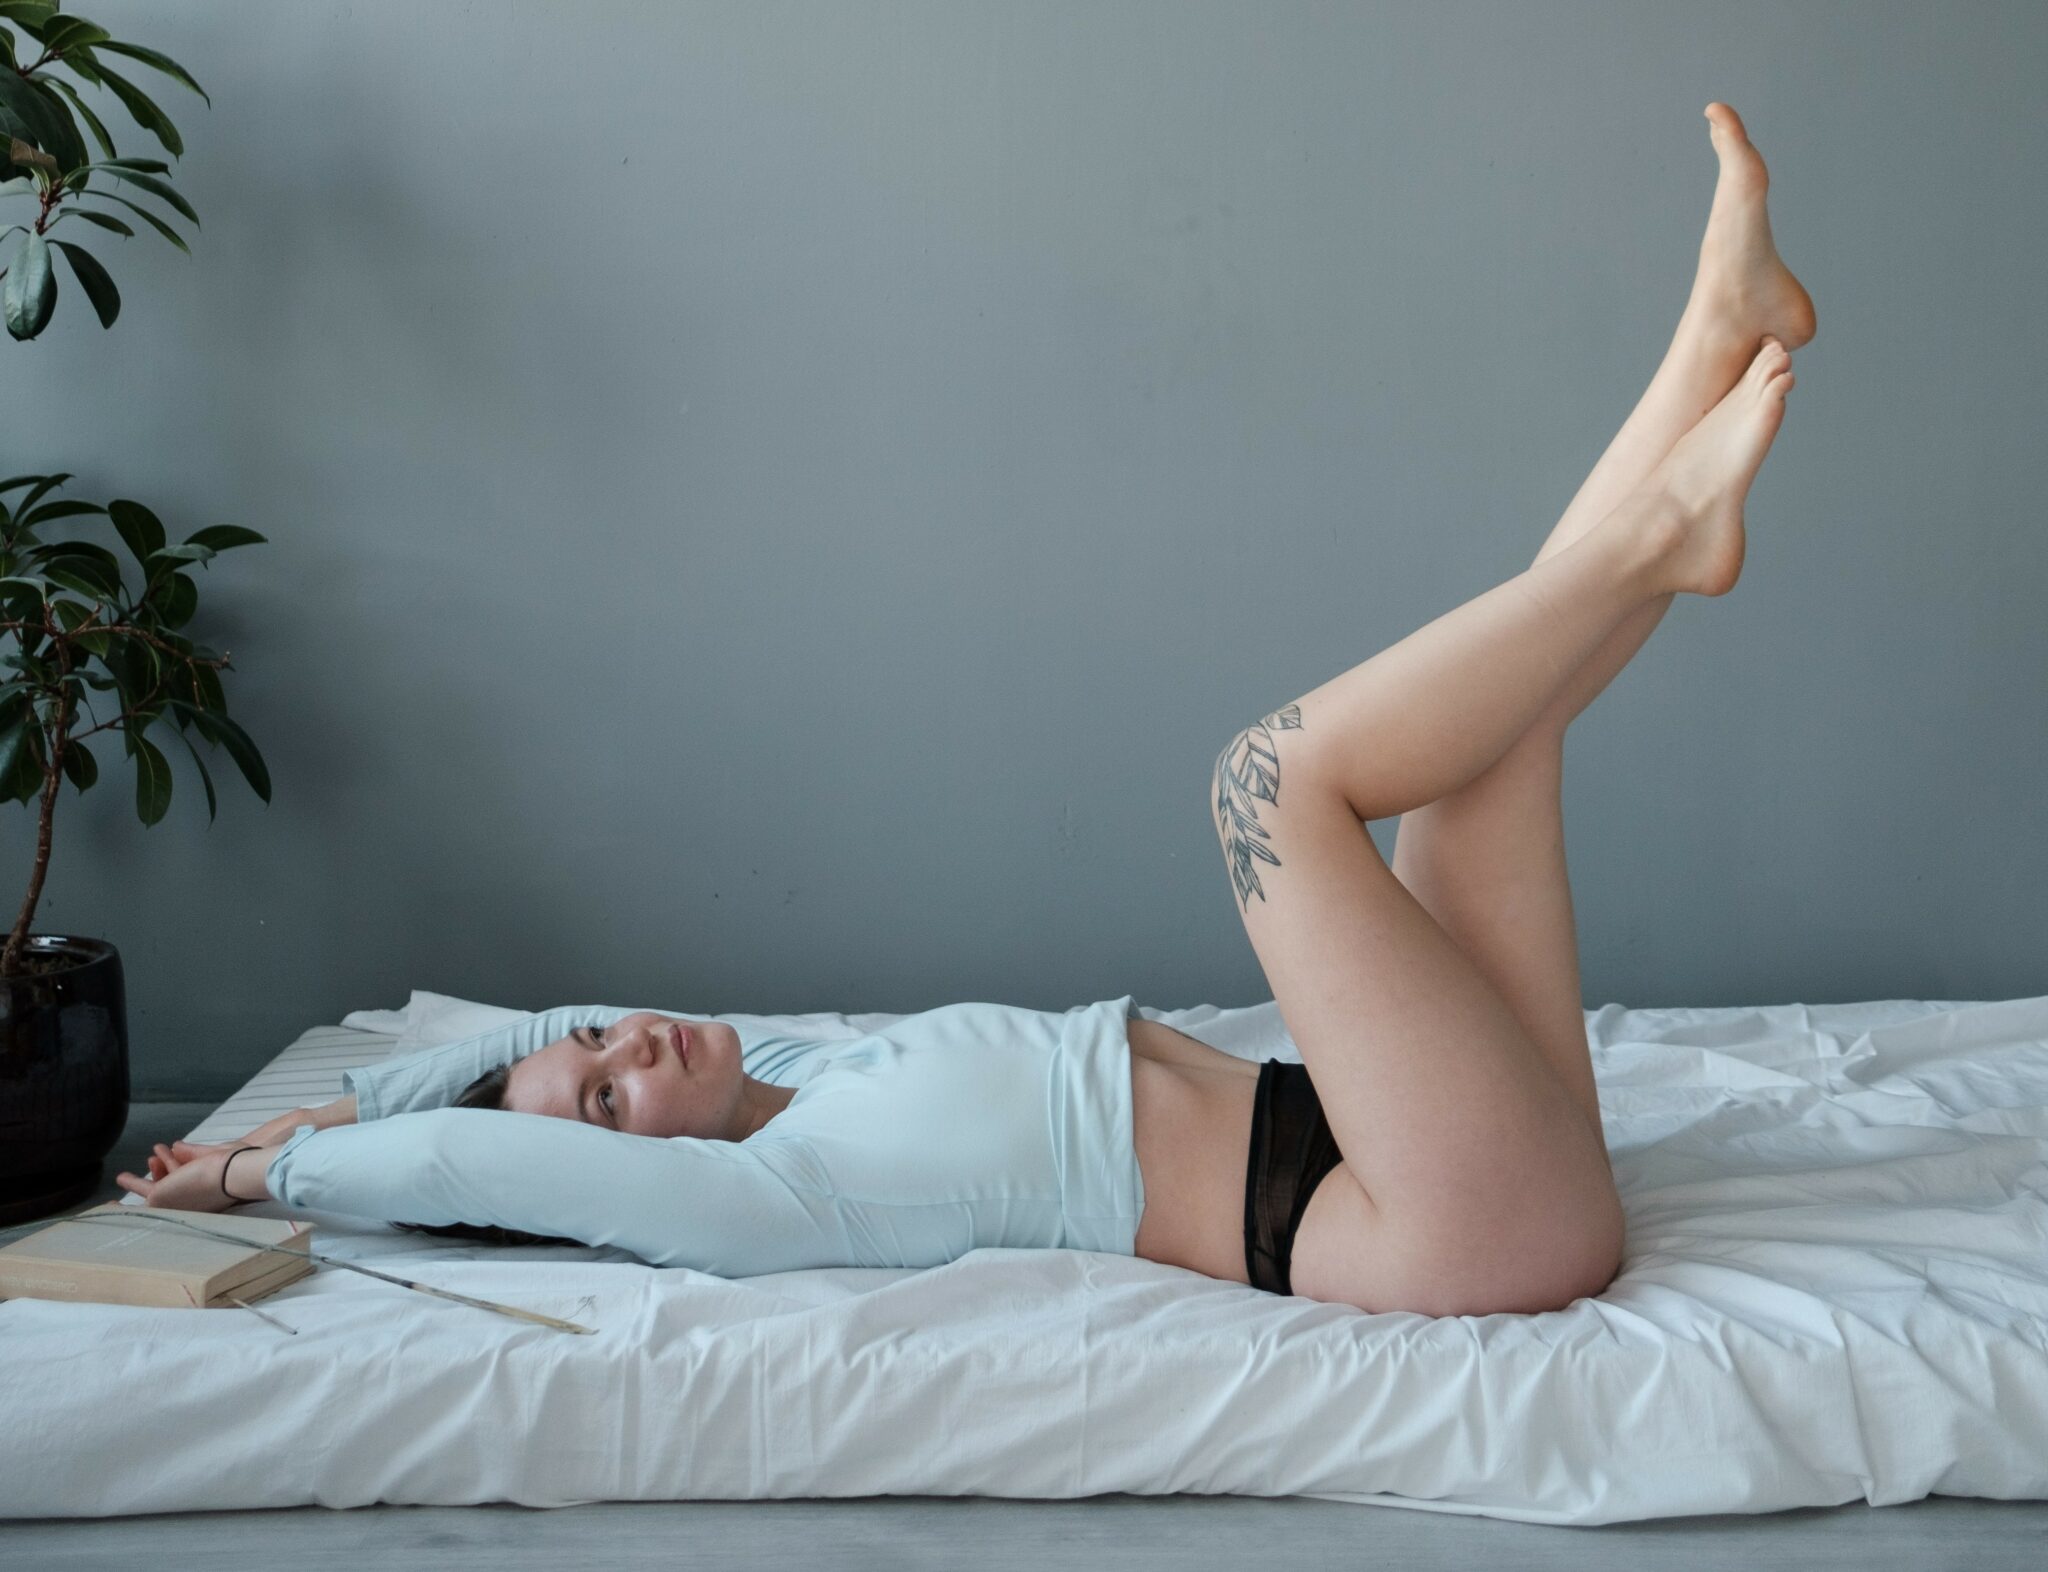 A woman posing on her bed in black underwear and a white long sleeve shirt, her legs lifted in the air.